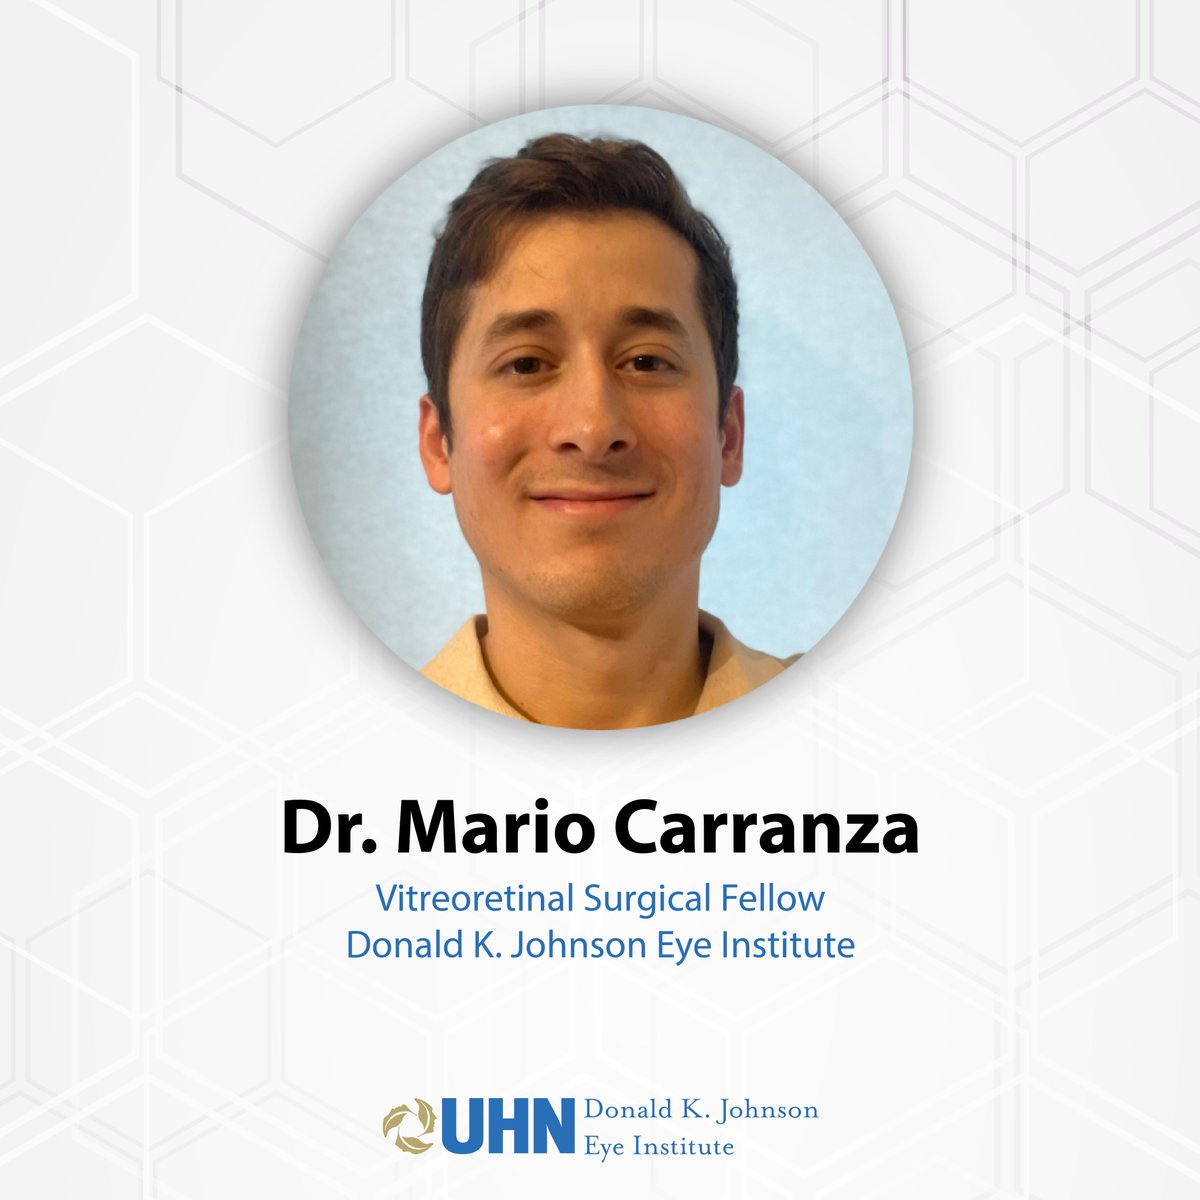 “Being an ophthalmologist is great because there is a combination of both surgical and clinical skills that you hone over time” Meet Dr. Mario Carranza, an ophthalmologist in the Vitreoretinal Surgical Fellowship program. Read in our newsletter >> bit.ly/3ytHnyf